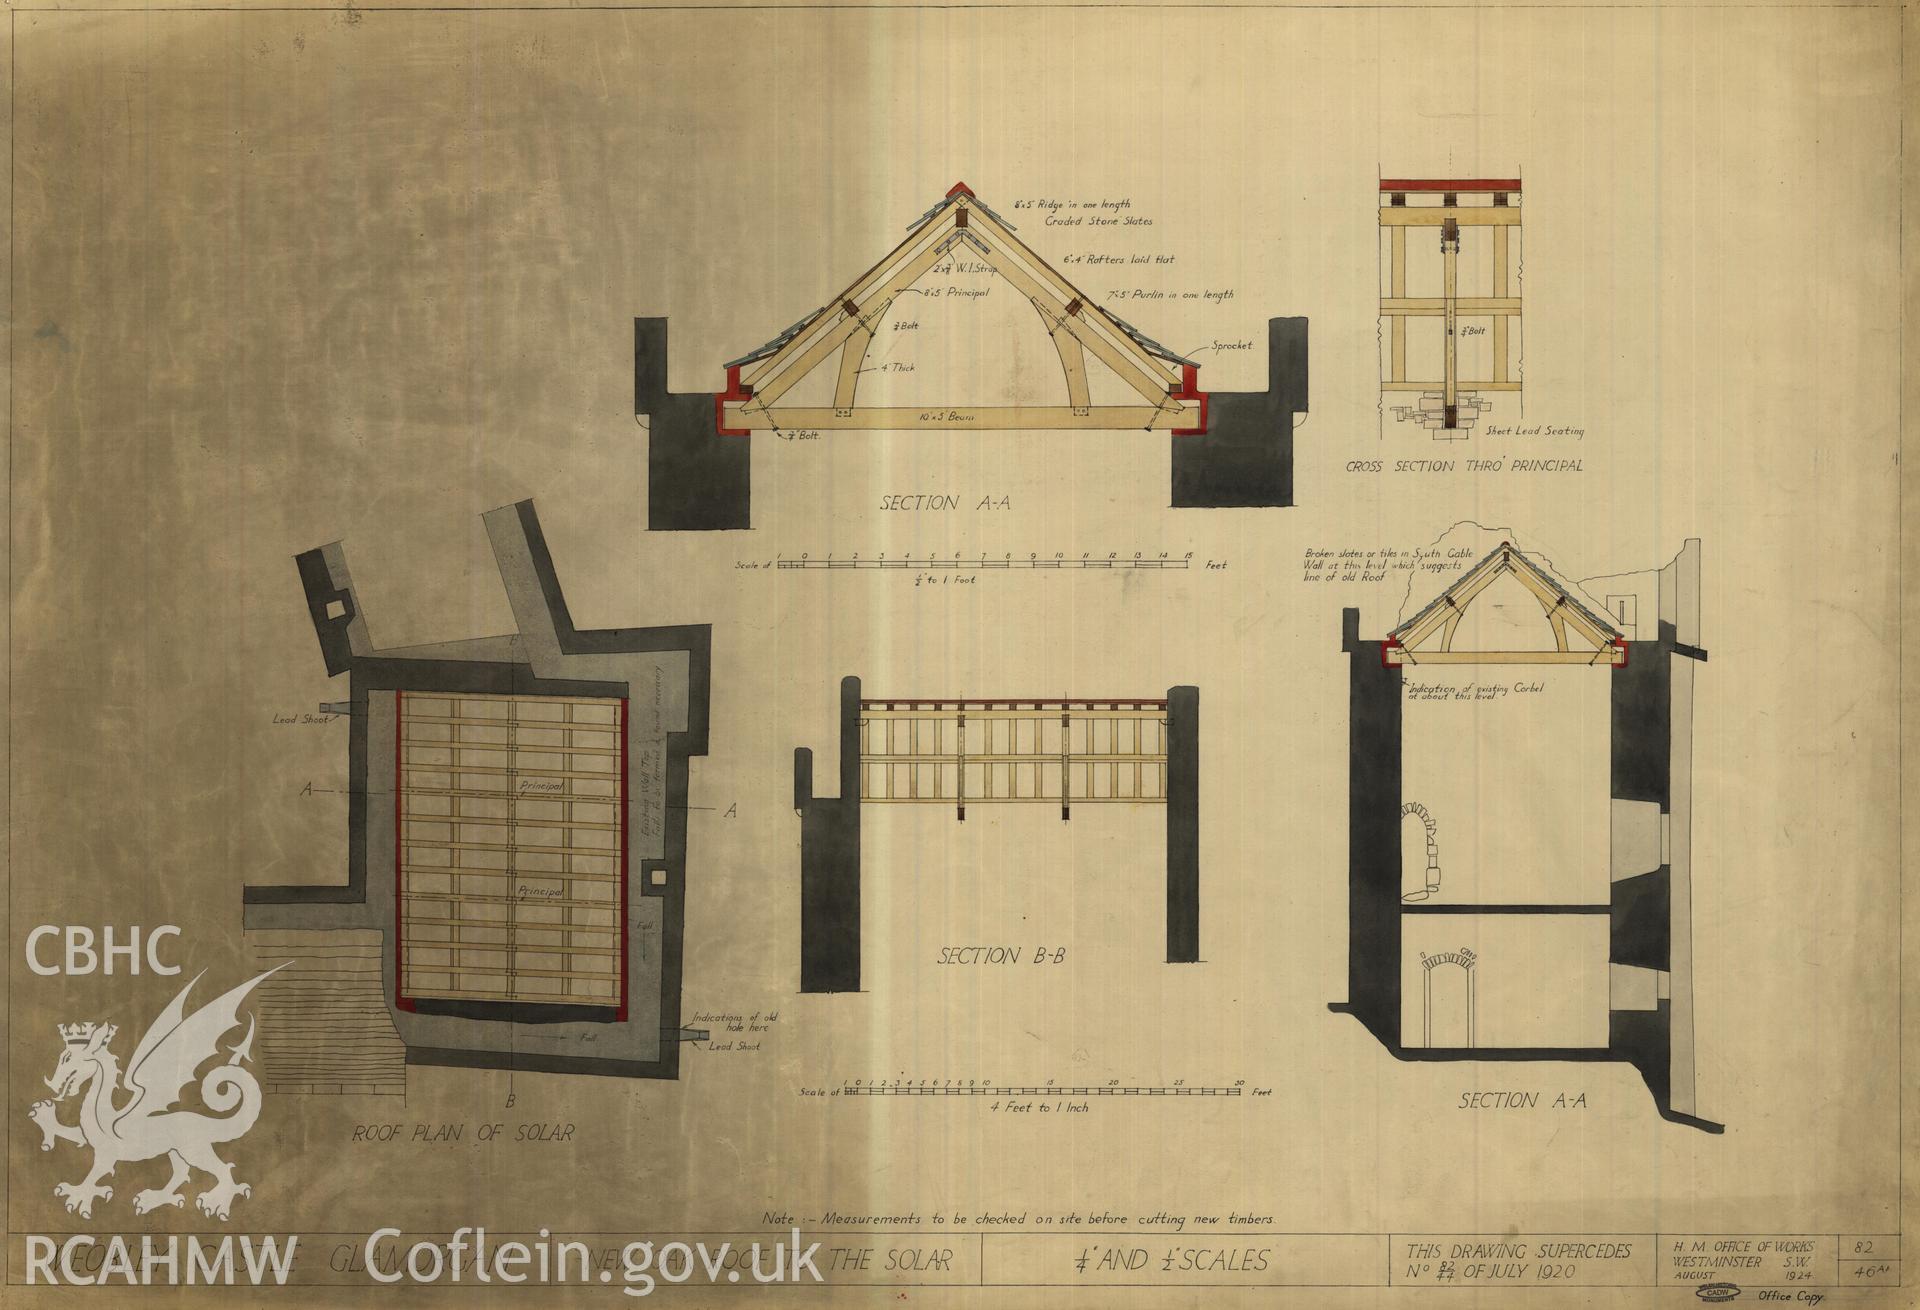 Cadw guardianship monument drawing of Weobley Castle. New solar roof, plan + 4 sections. Cadw Ref. No:82/46A1. Scale 1:48.24.